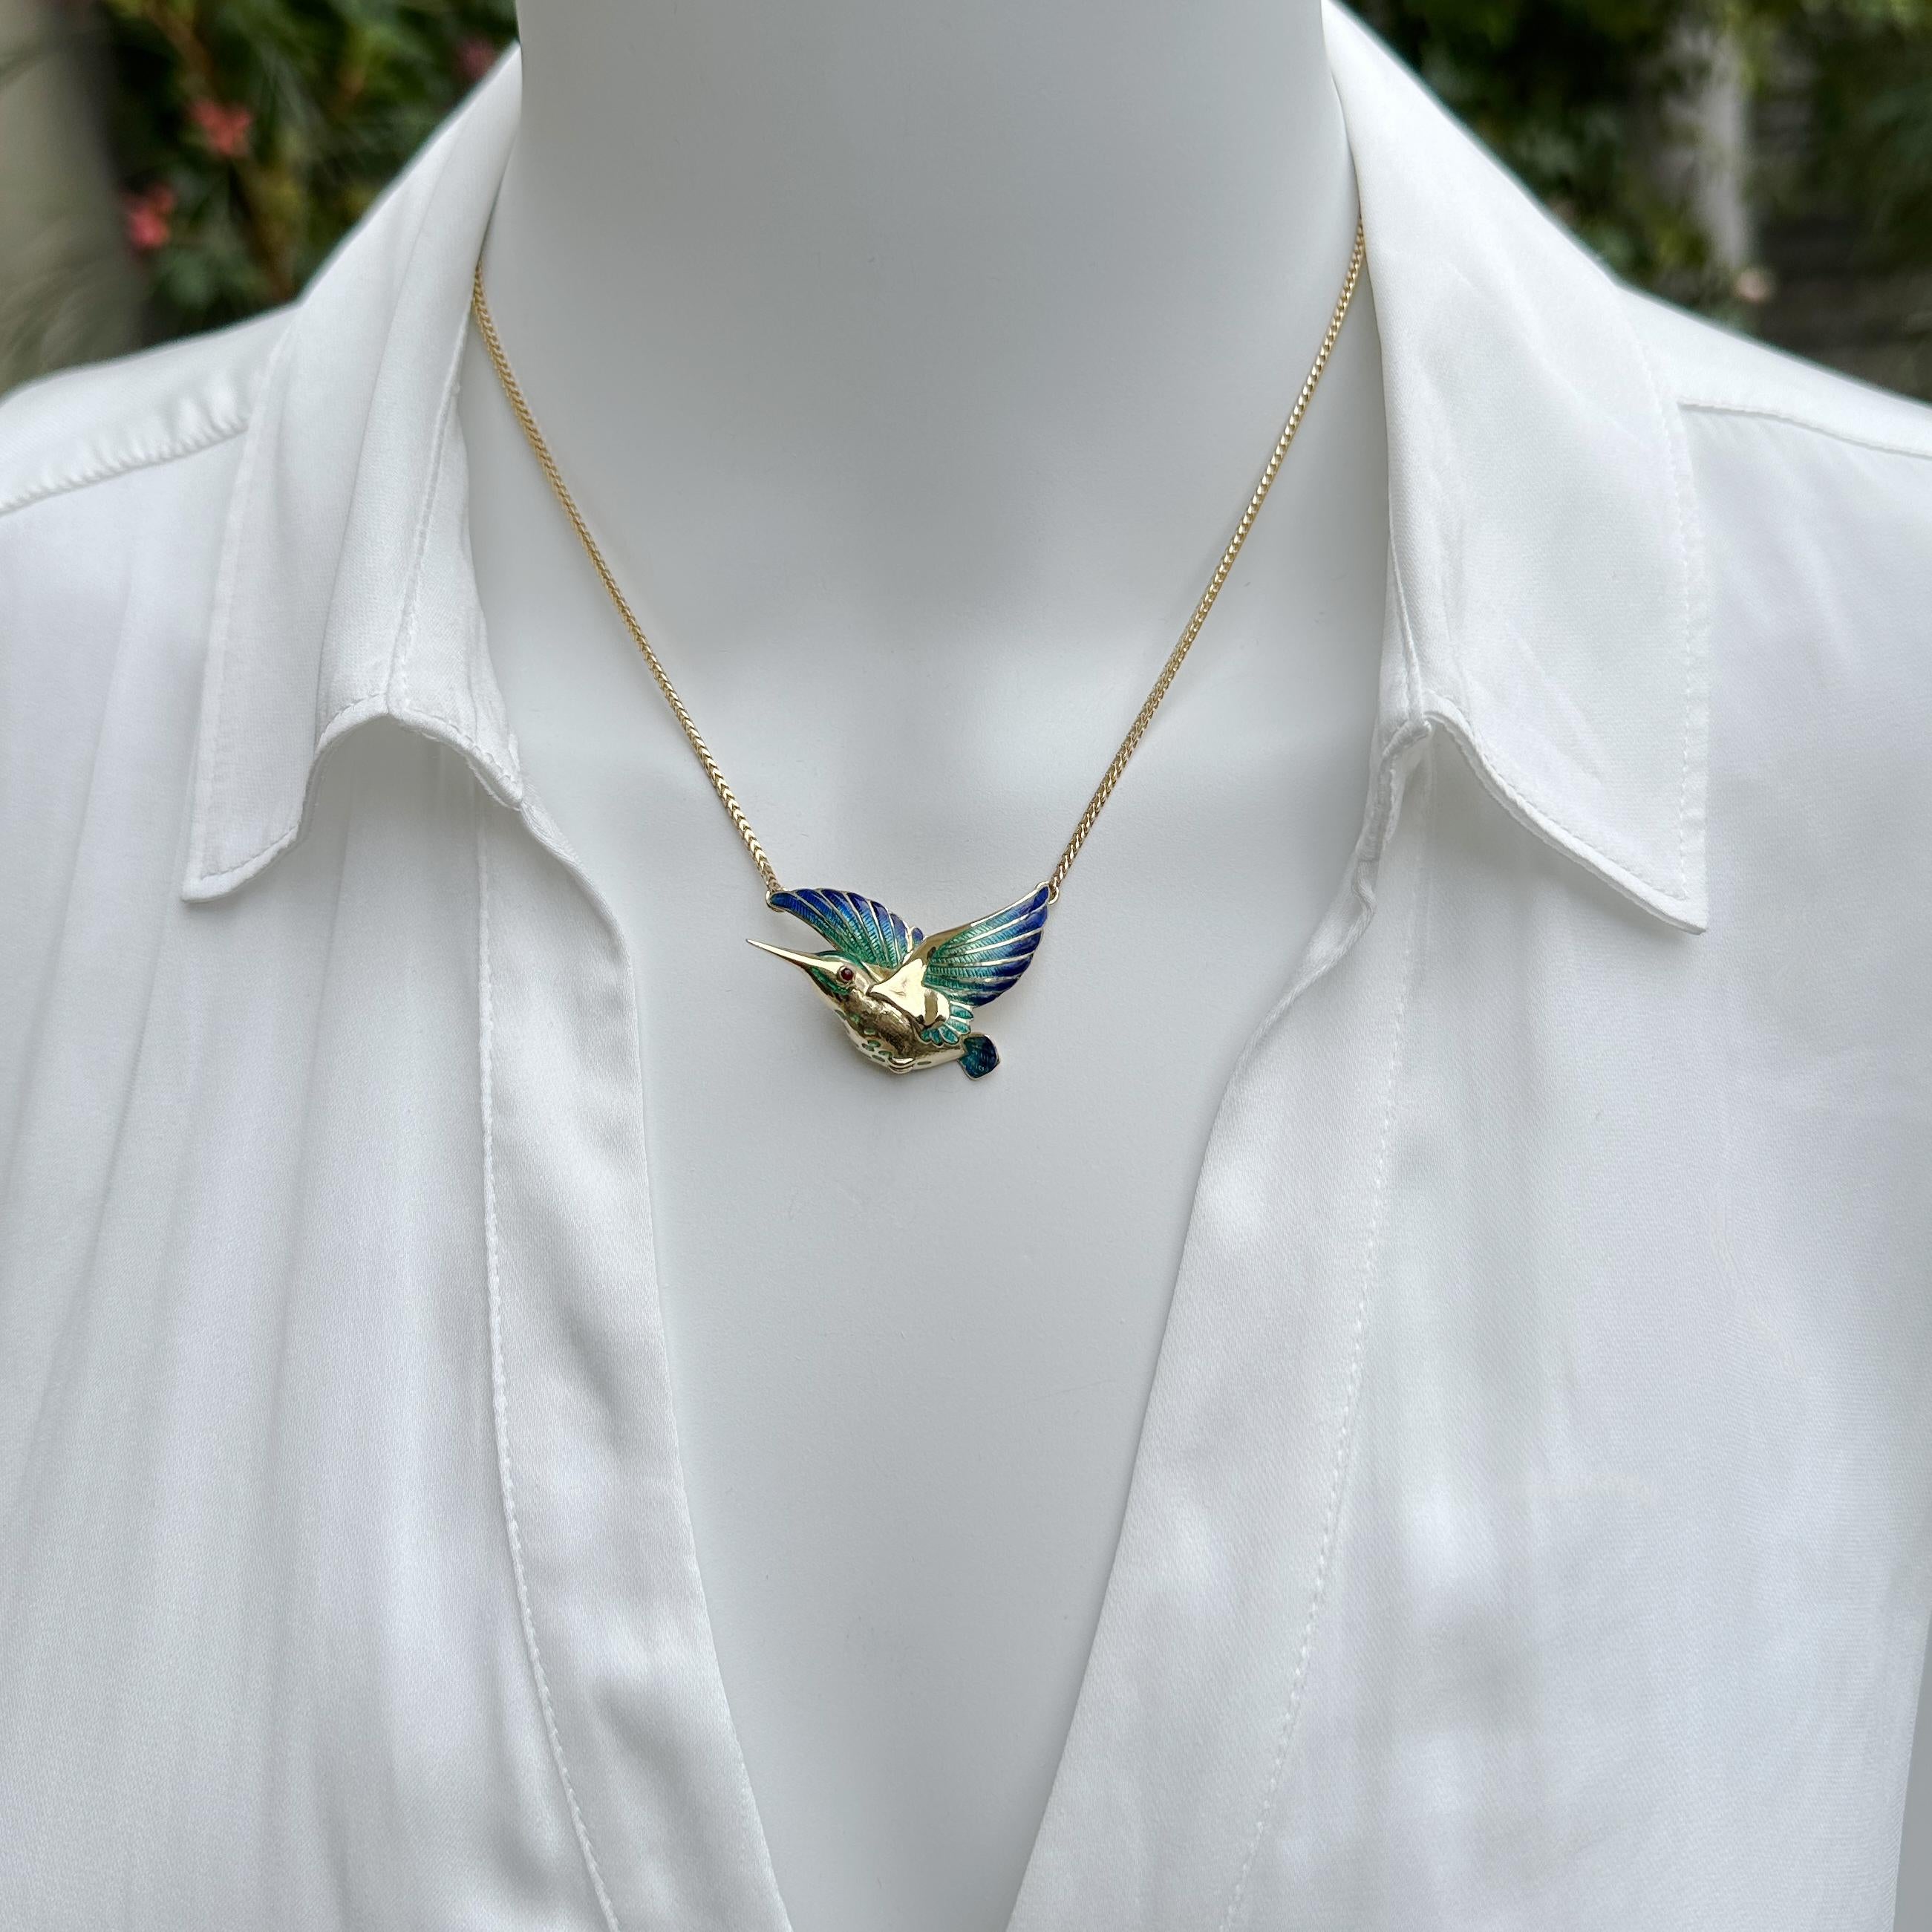 This adorable hummingbird -- about a third the size of a real hummingbird -- came to us as a bale pendant (which was, we believe a conversion from a brooch), but we converted it to a fixed pendant and added a soft, just-thick-enough franco